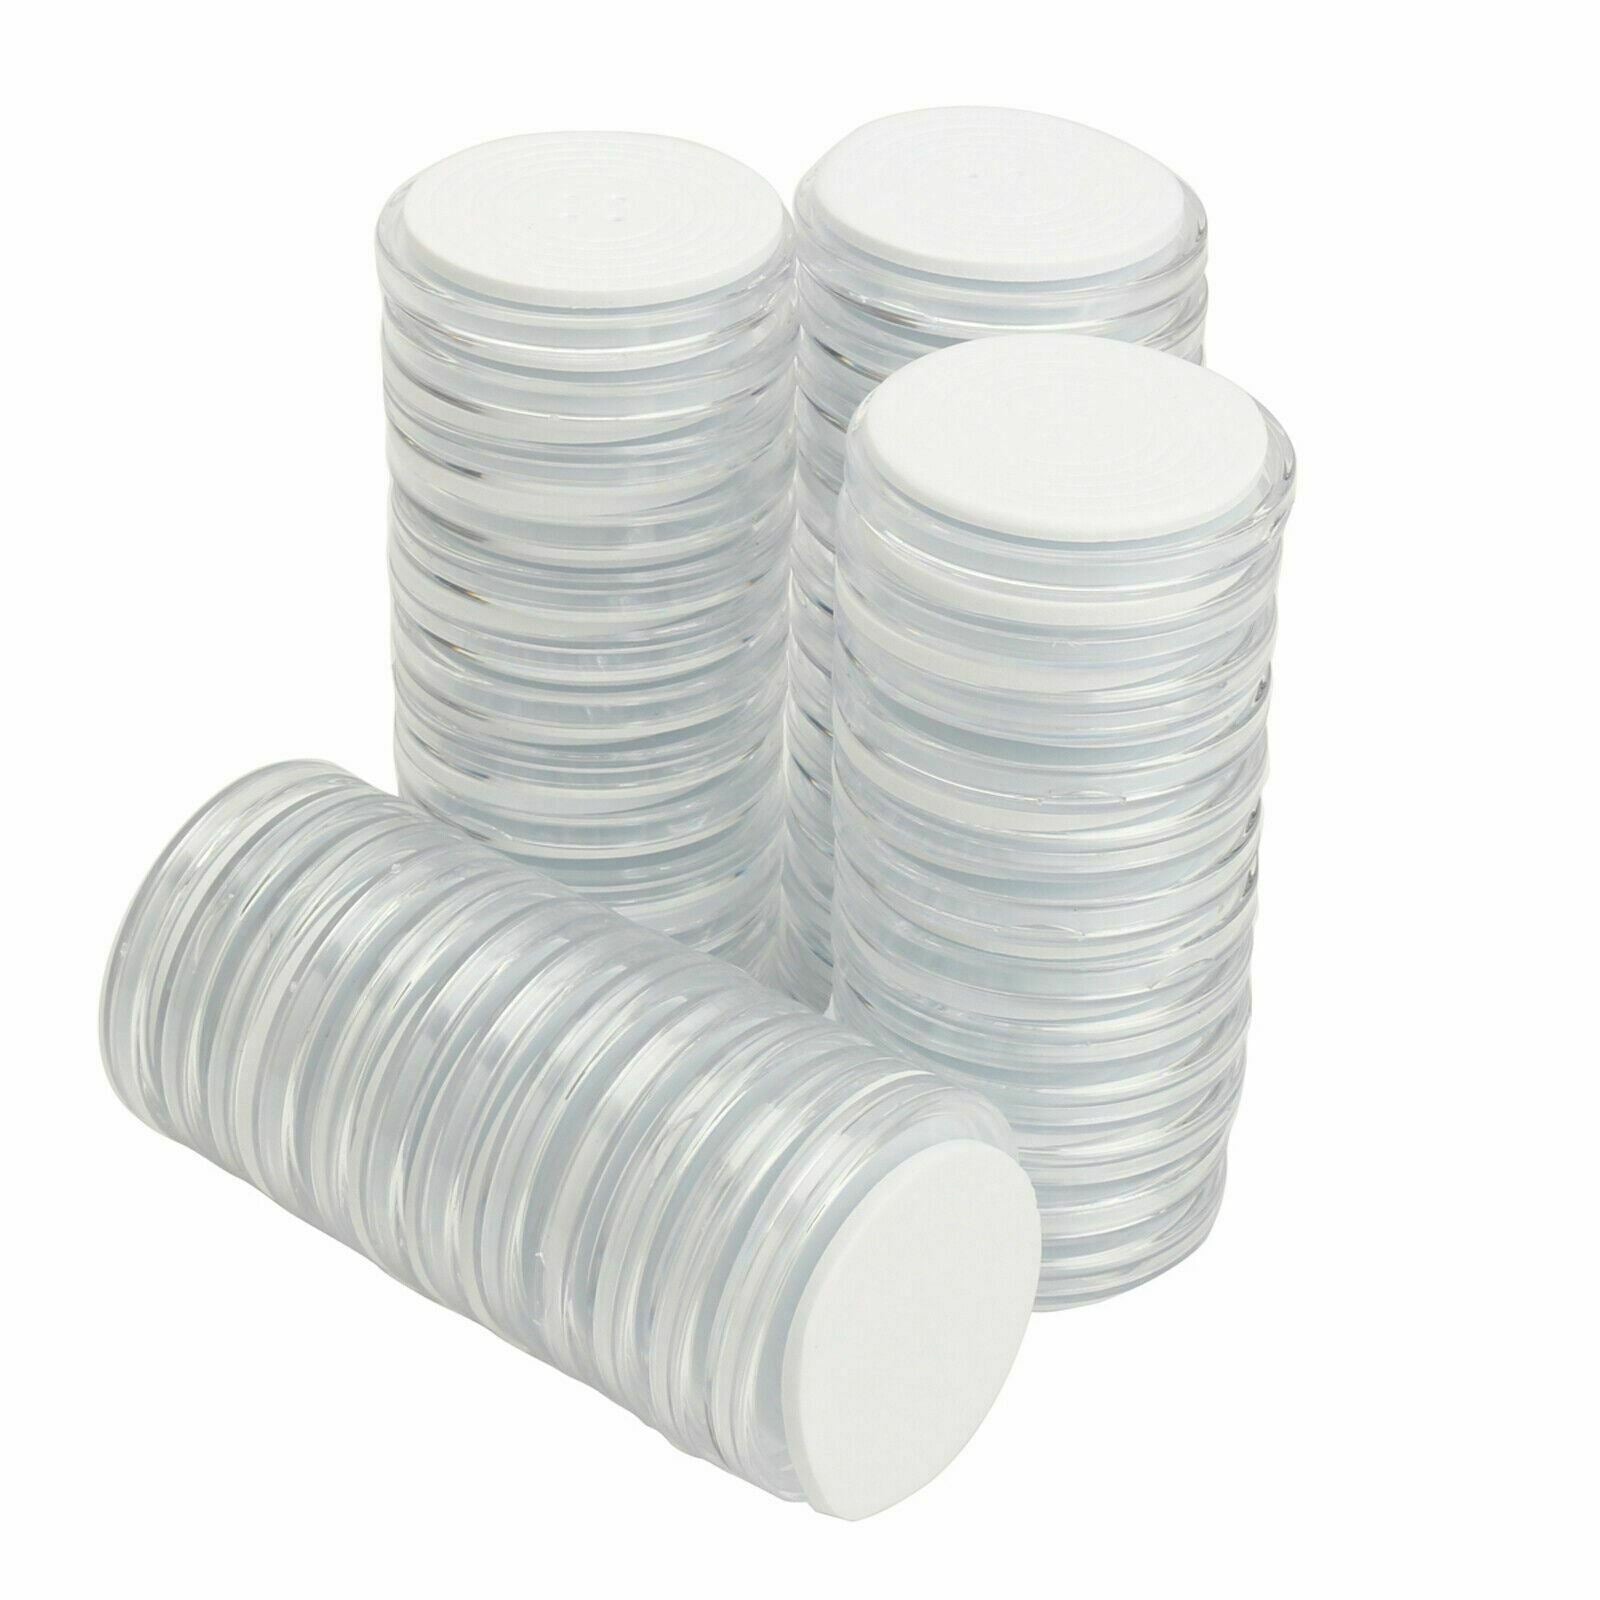 50pcs Clear Coin Plastic Holder Capsule Case Cover Adjustable 19 24 29 34 39mm